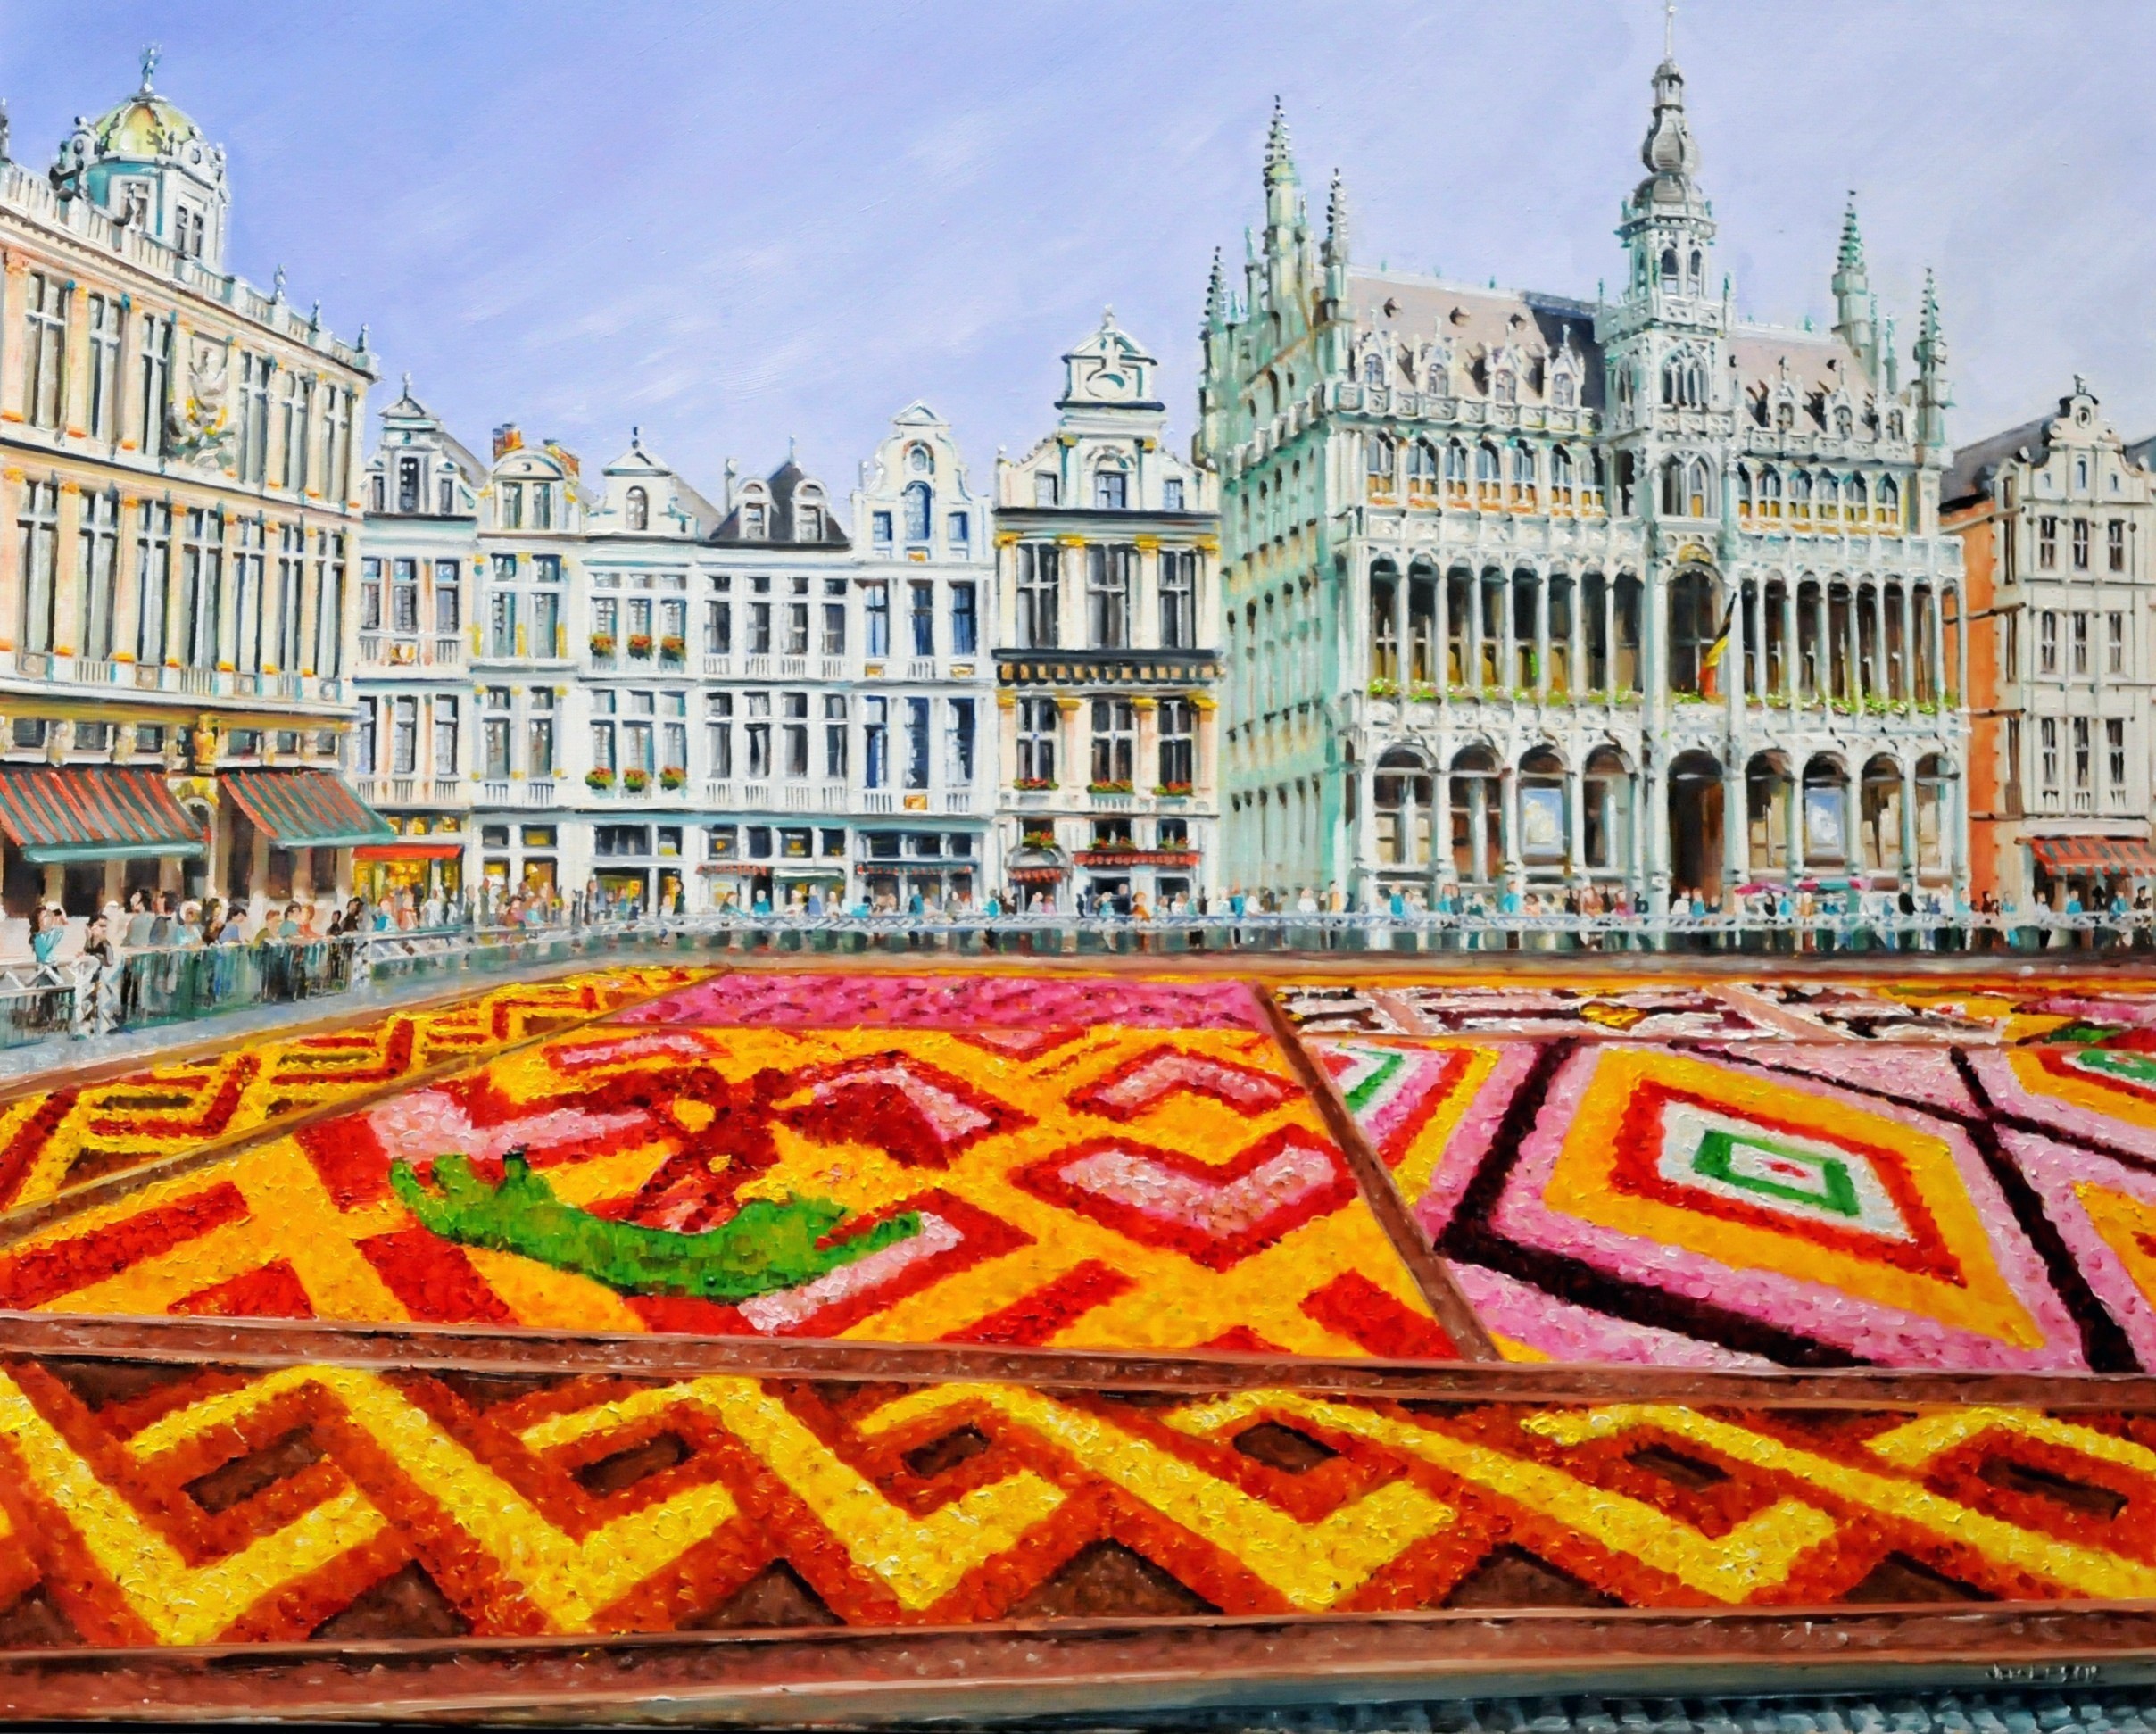 Flower carpet at the Grand Place Brussels, Belgium | Oil on linen | Year: 2022 | Dimensions: 80x100cm